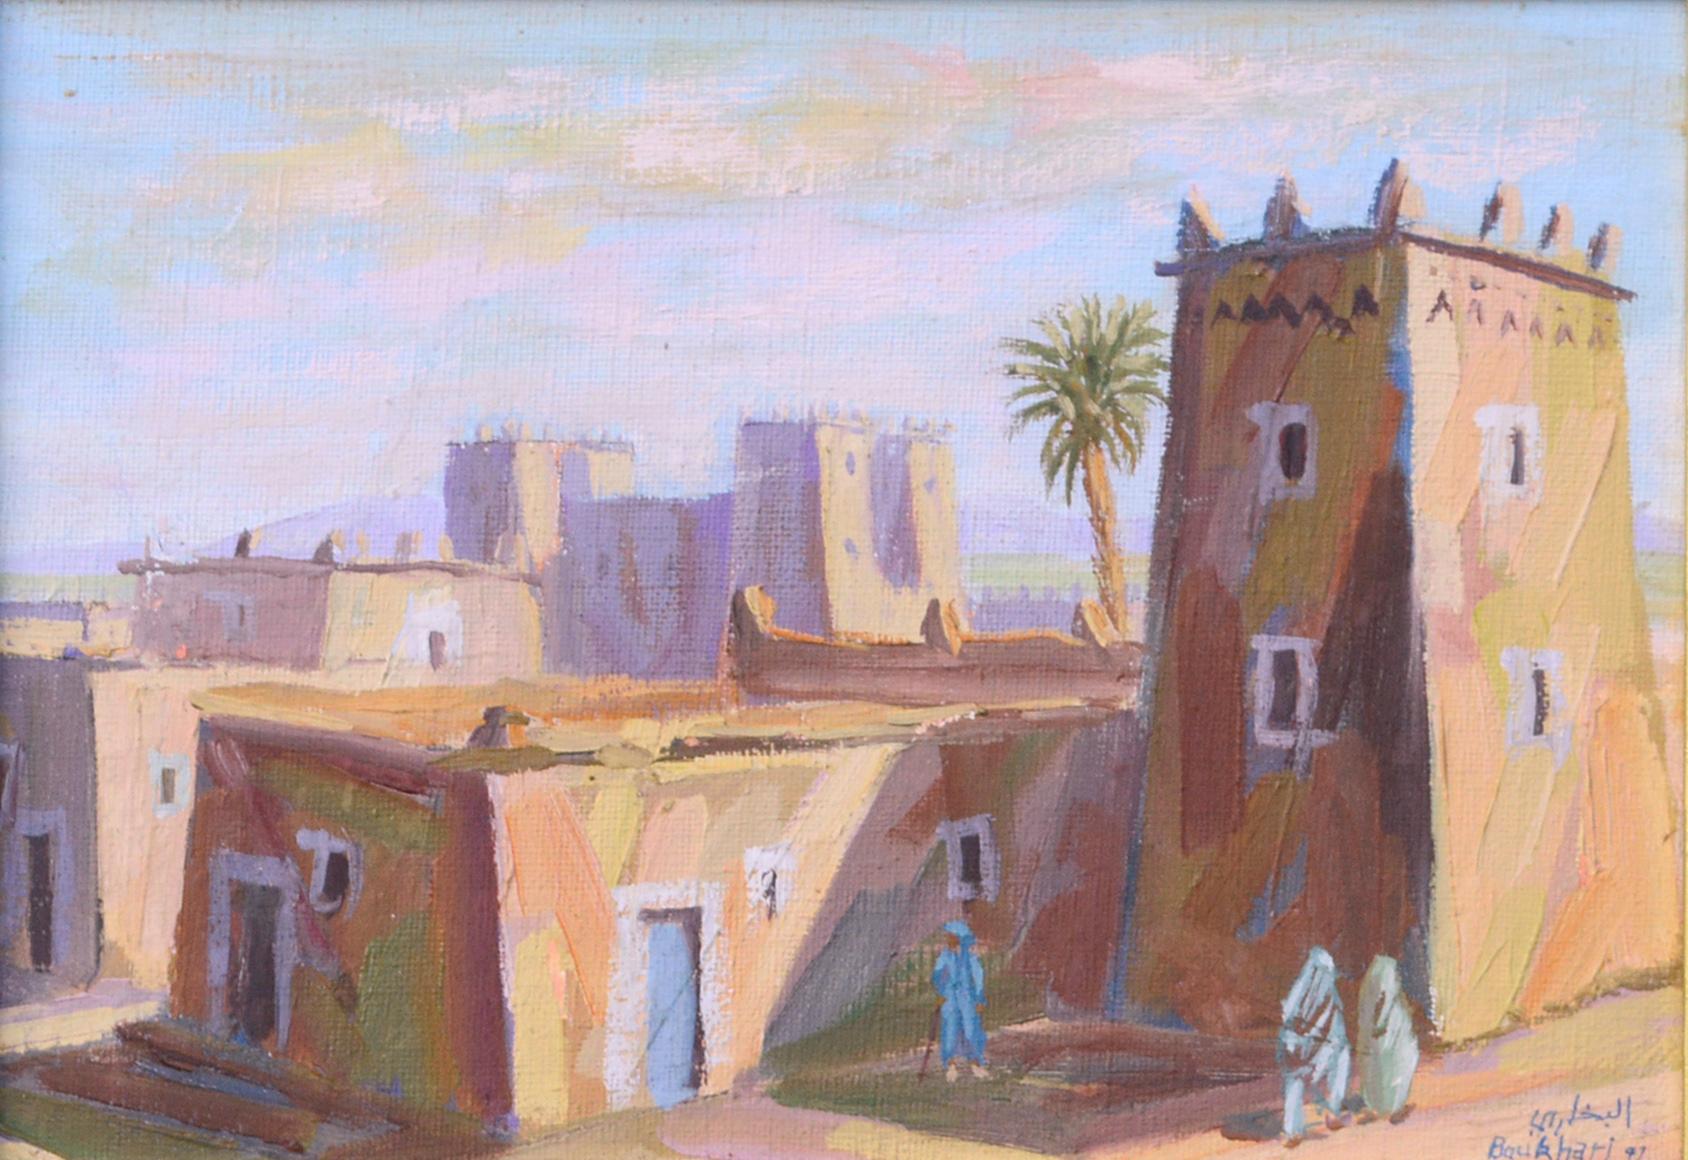 Middle Eastern Street Scene, Small-Scale Figural Village Landscape  - Painting by Boukhari